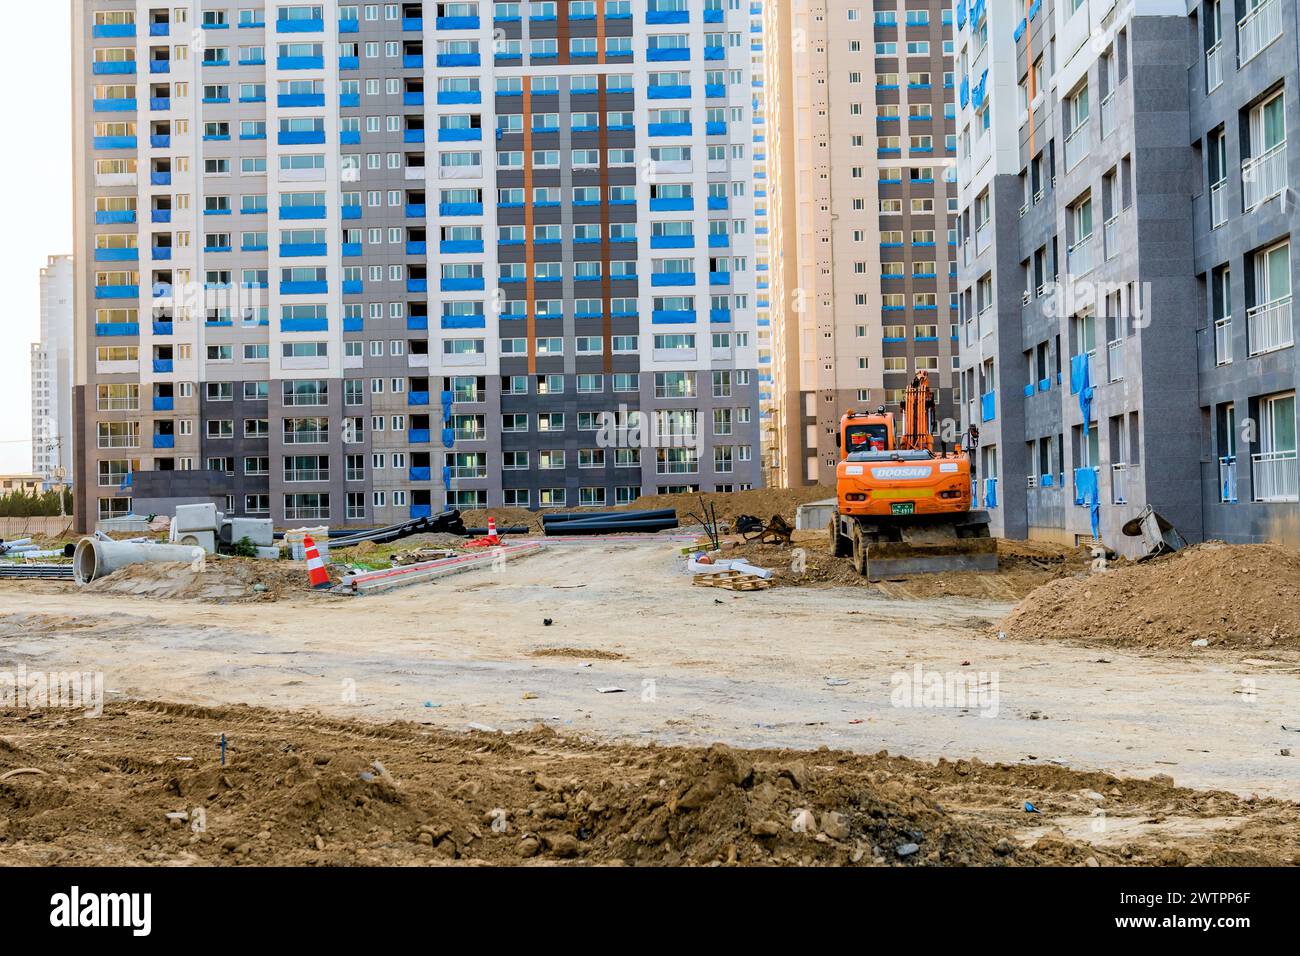 Orange excavator on a dirt road with newly constructed high-rise apartment buildings, in Daejeon, South Korea Stock Photo